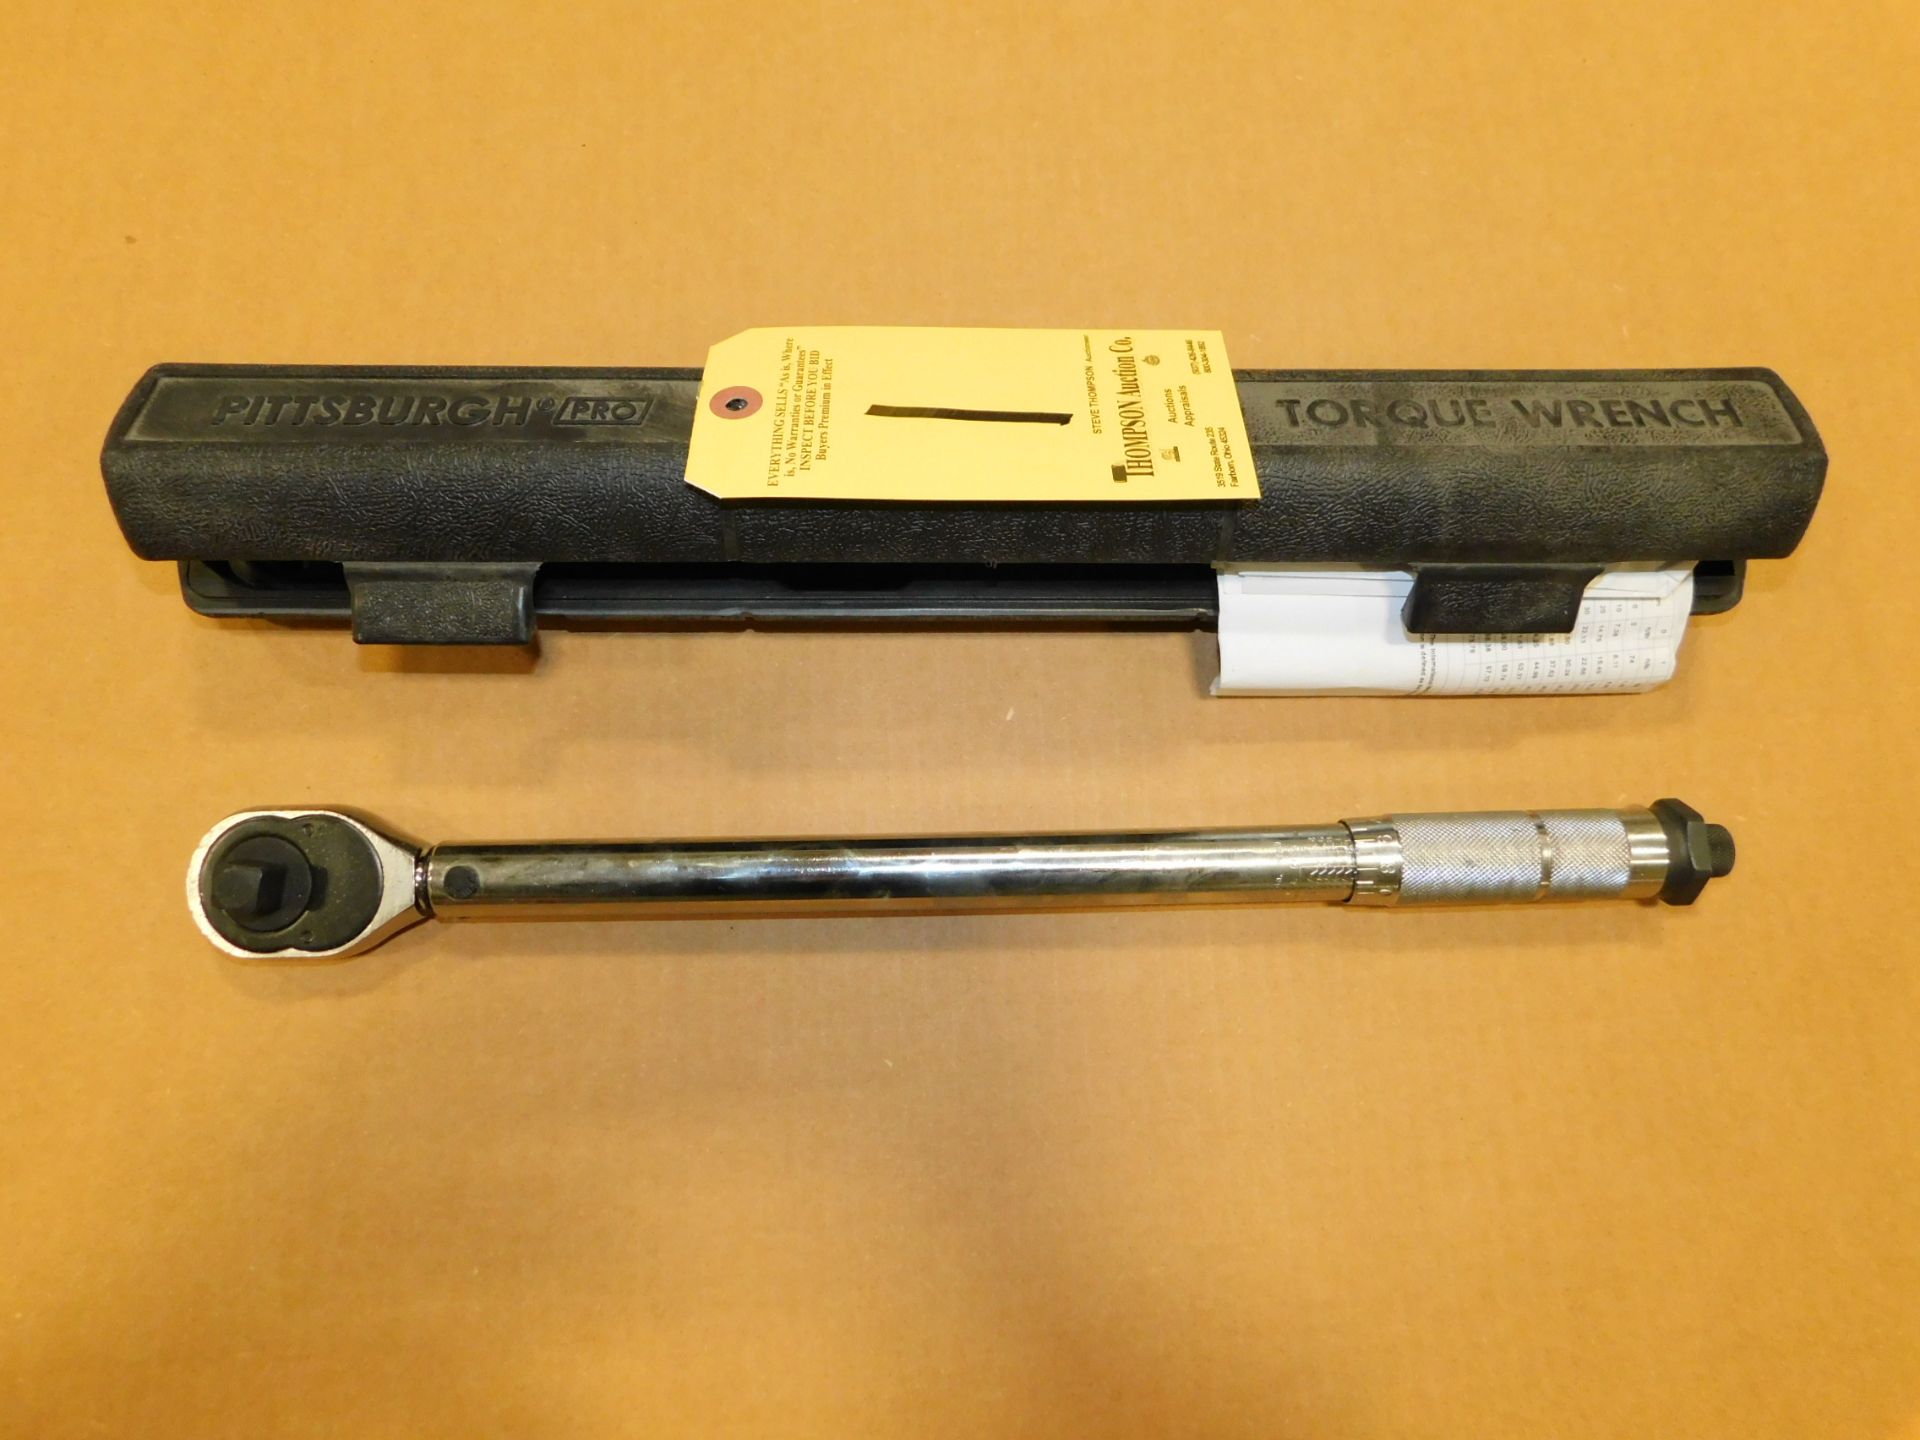 Pittsburgh 1/2 Inch Drive Click Type Torque Wrench